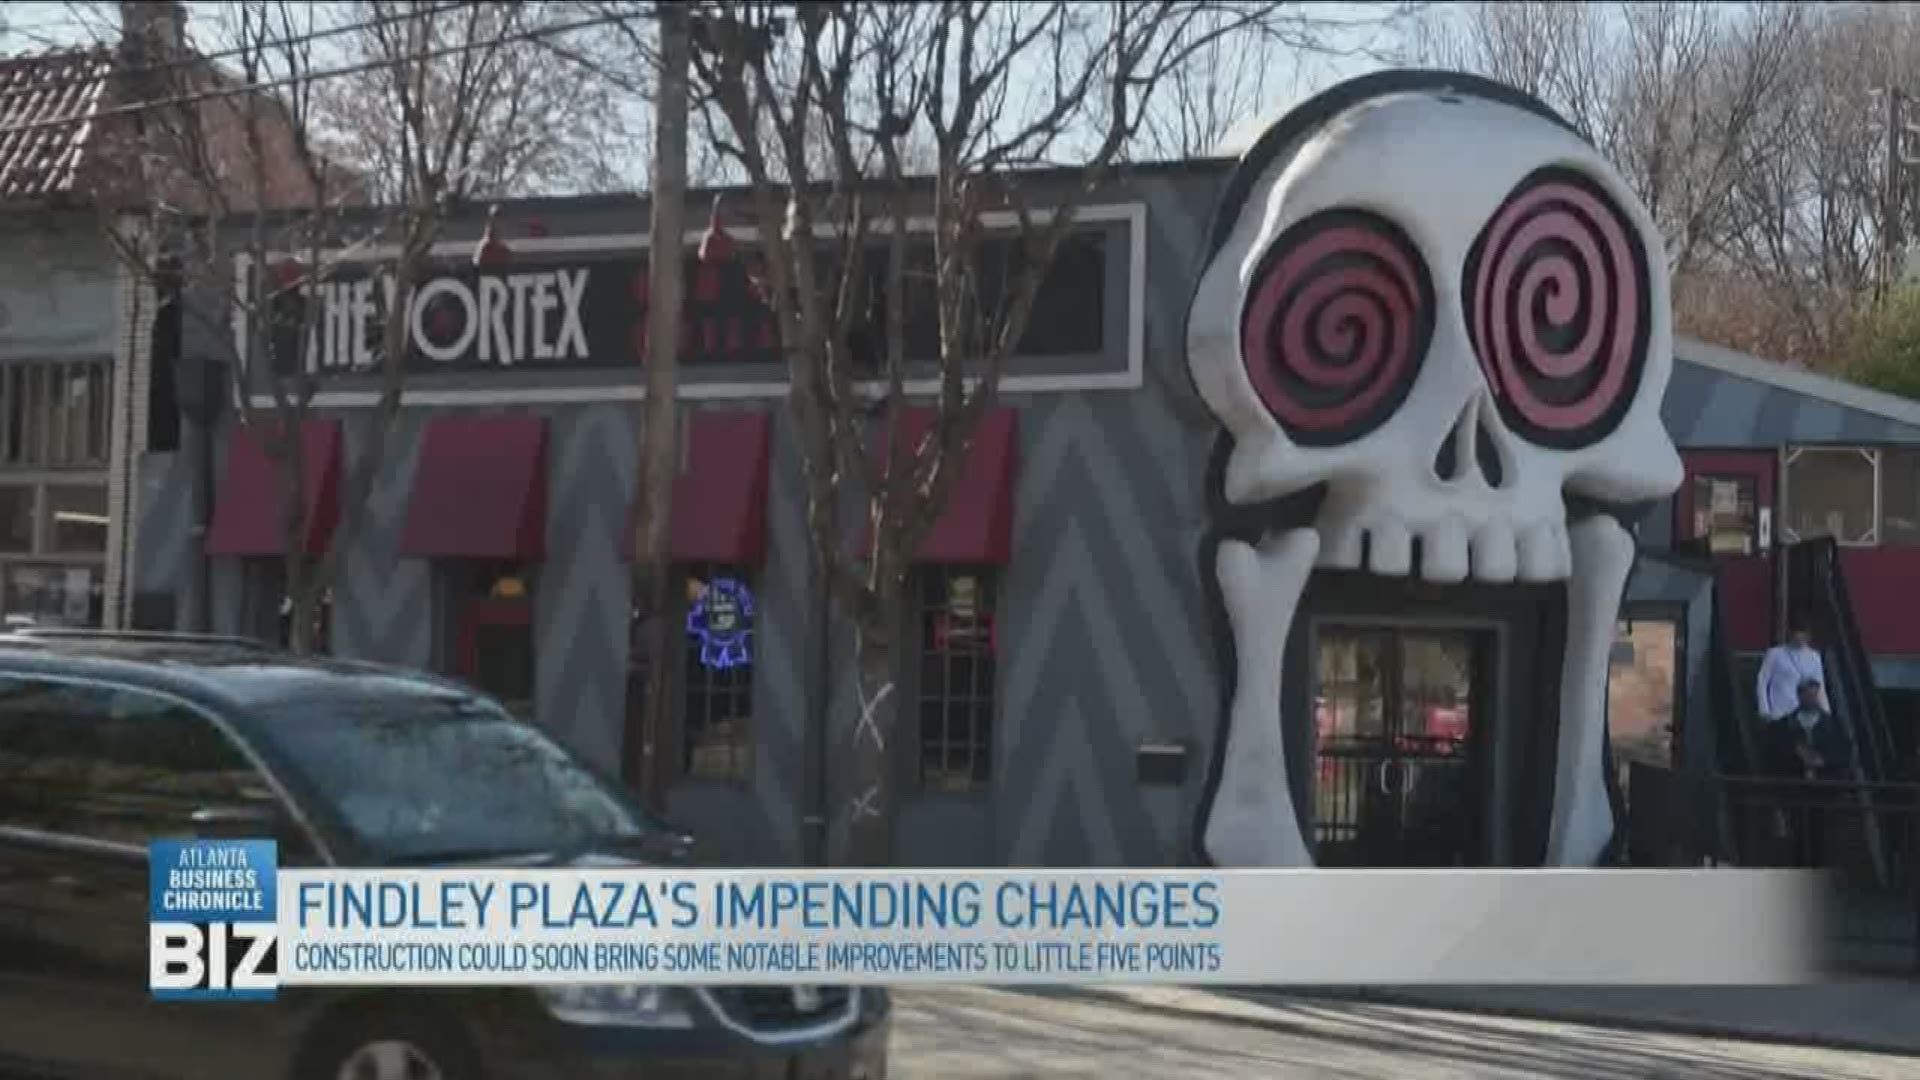 There could soon be some notable improvements to the Little Five Points area. Watch 'Atlanta Business Chronicle's BIZ' Sunday mornings at 11:00 on 11Alive.